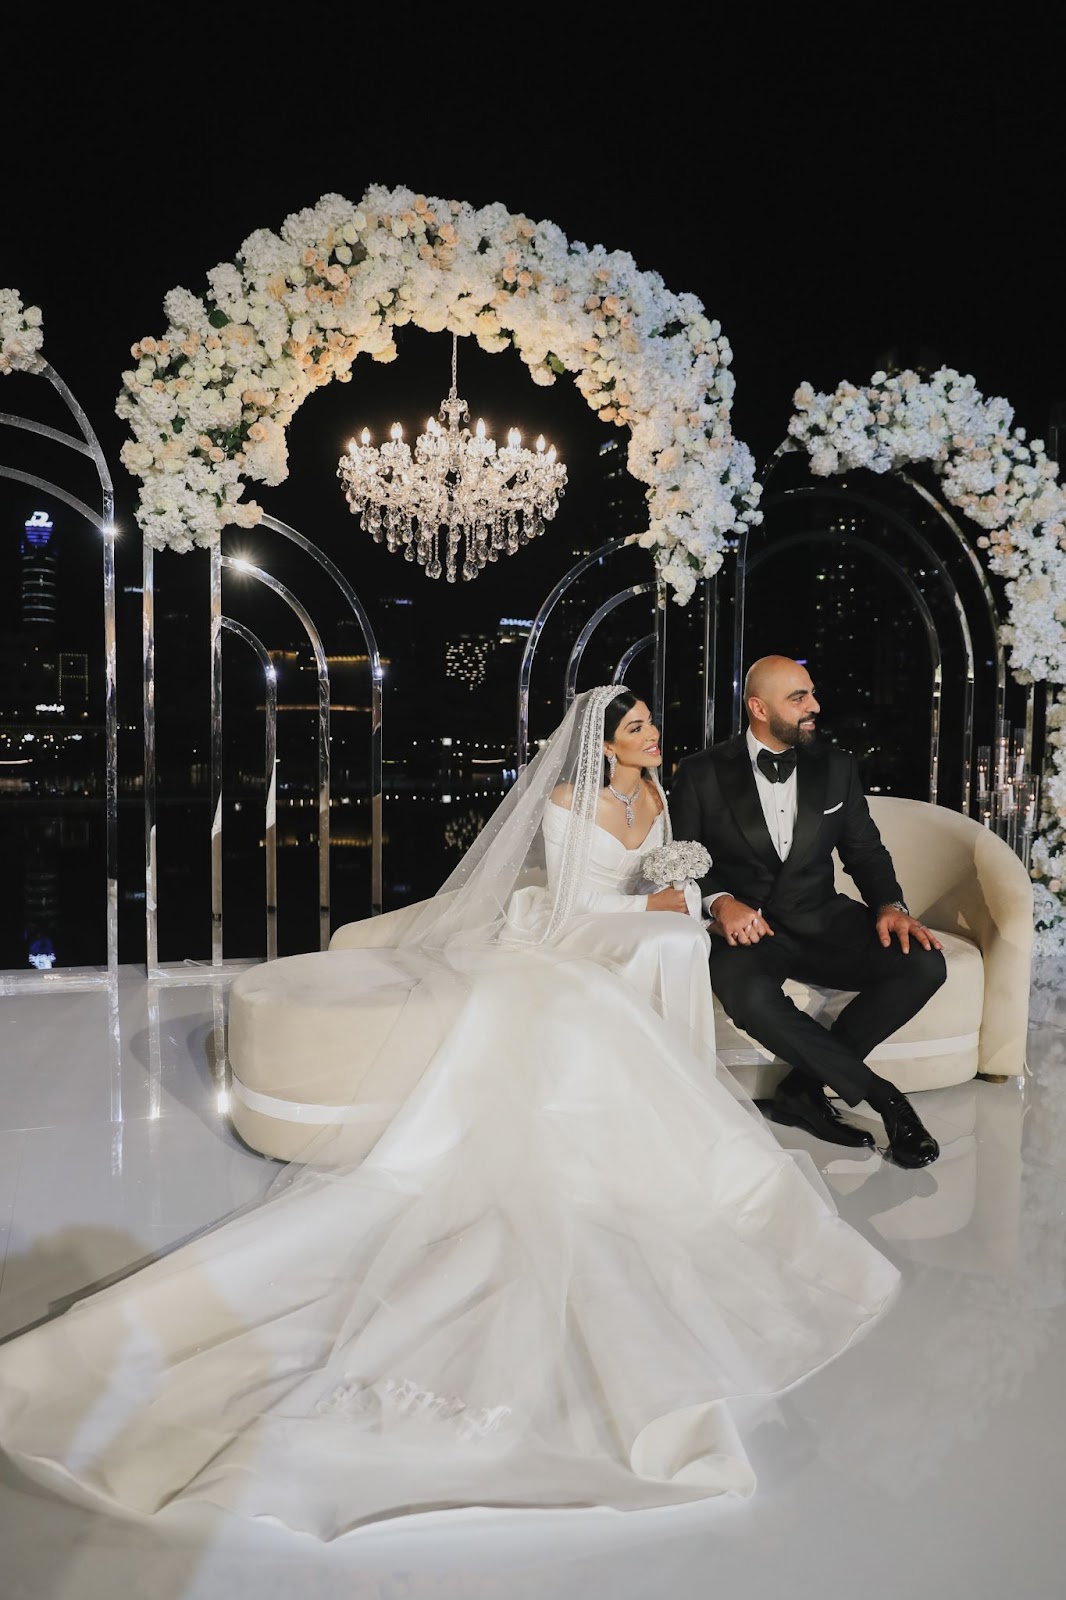 Top 10 Locations For Wedding Photography In Dubai, According To  Renowned Photographer